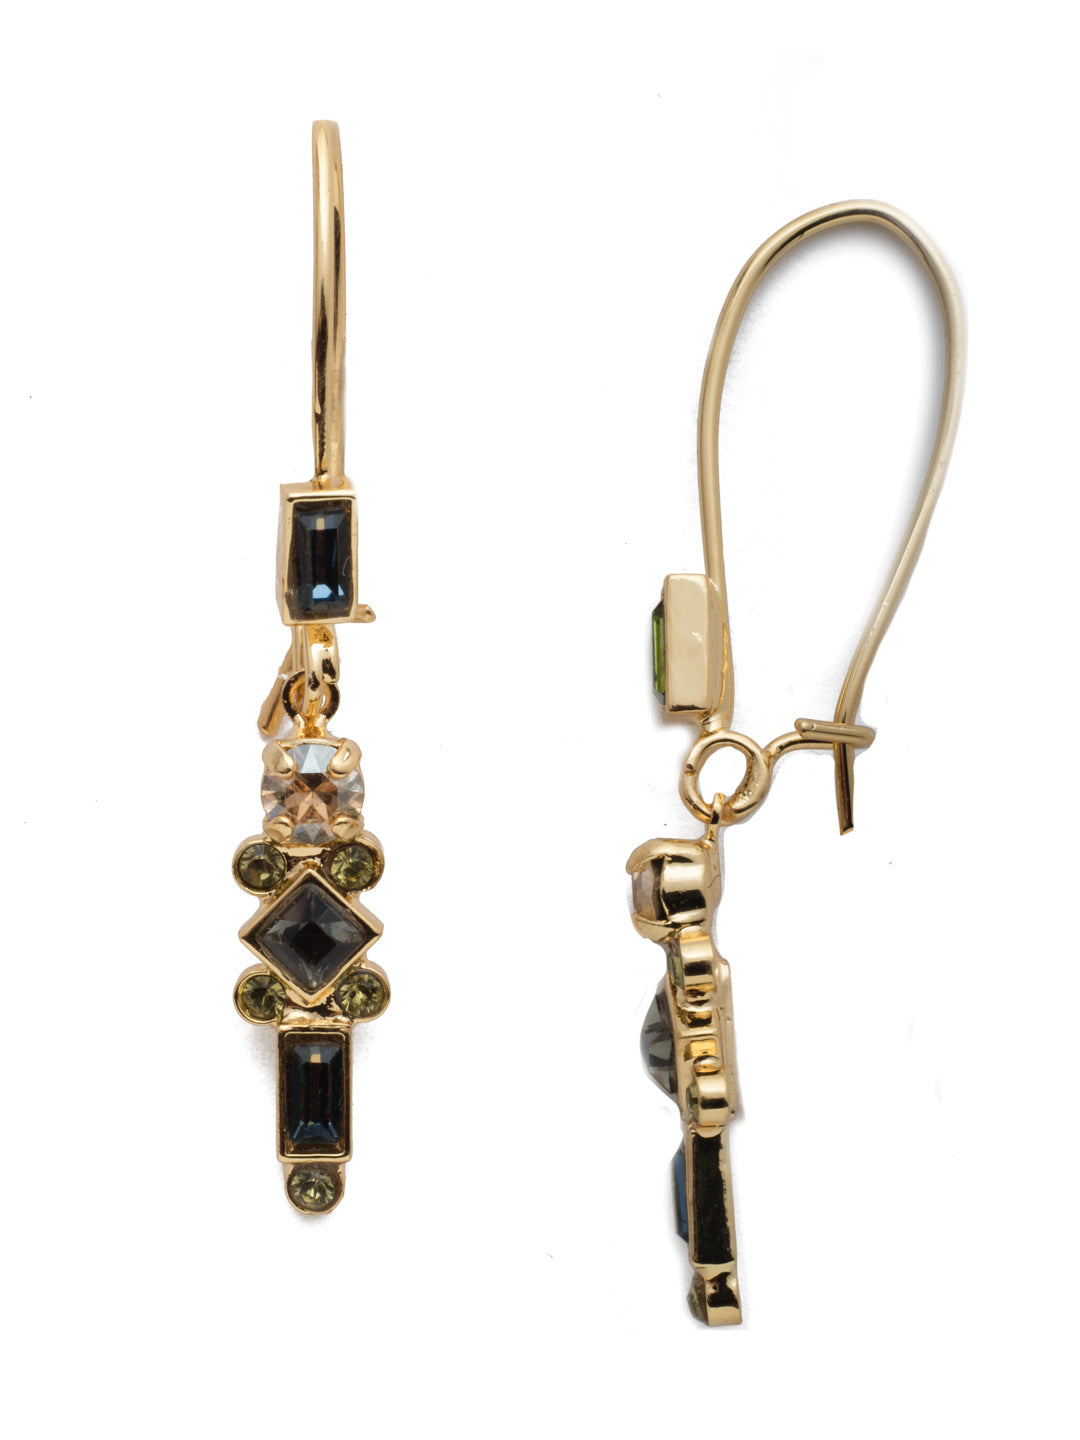 Willa Dangle Earrings - EET55BGCSM - Our Willa Dangle Earrings add a touch of drama with light and dark sparkling crystal tones in an assortment of shapes including baquette and round stones. From Sorrelli's Cashmere collection in our Bright Gold-tone finish.